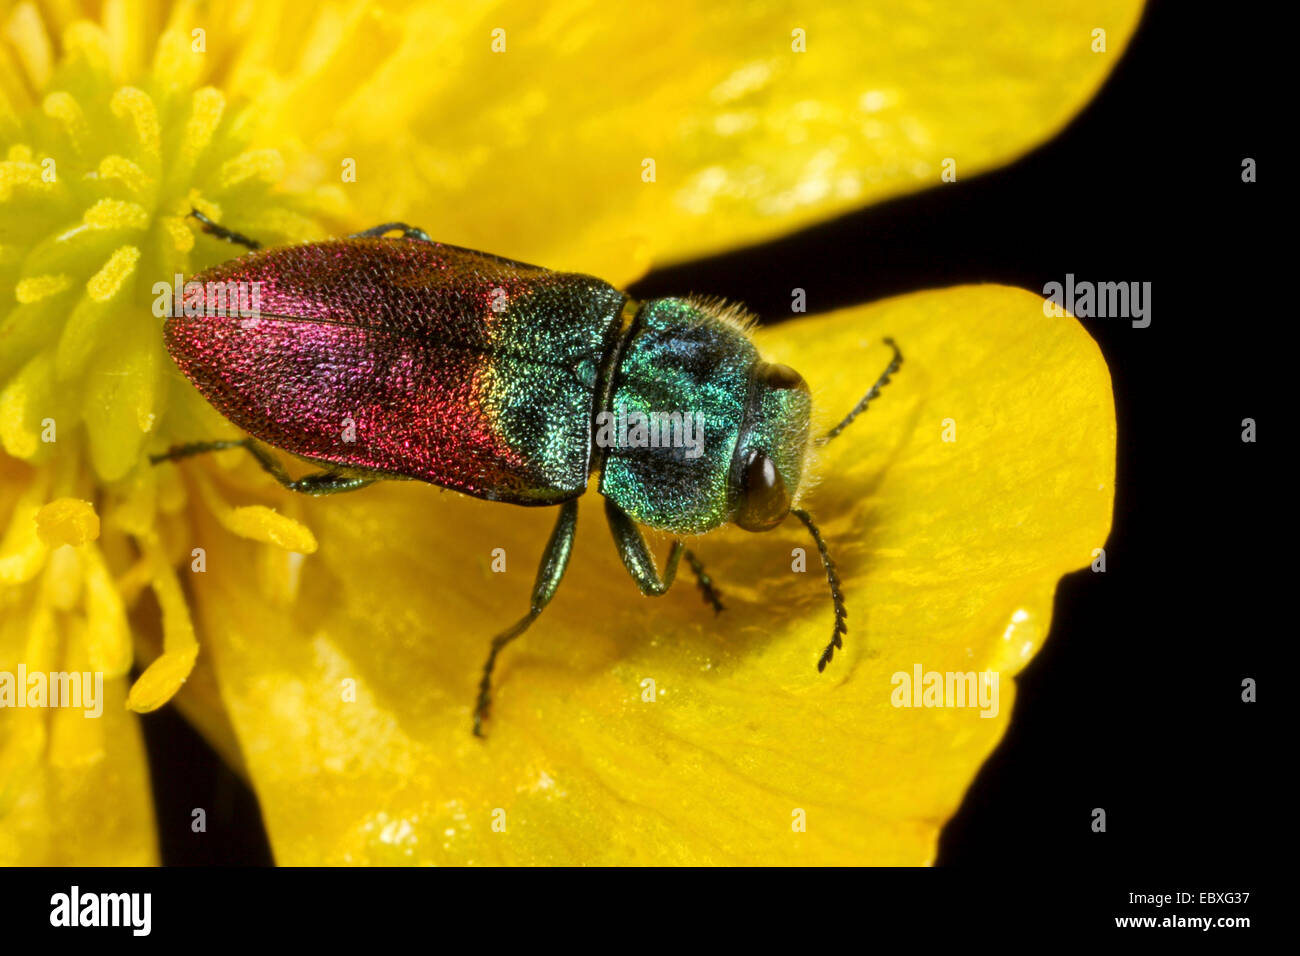 splendour beetle (Anthaxia salicis), on a flower, Germany Stock Photo